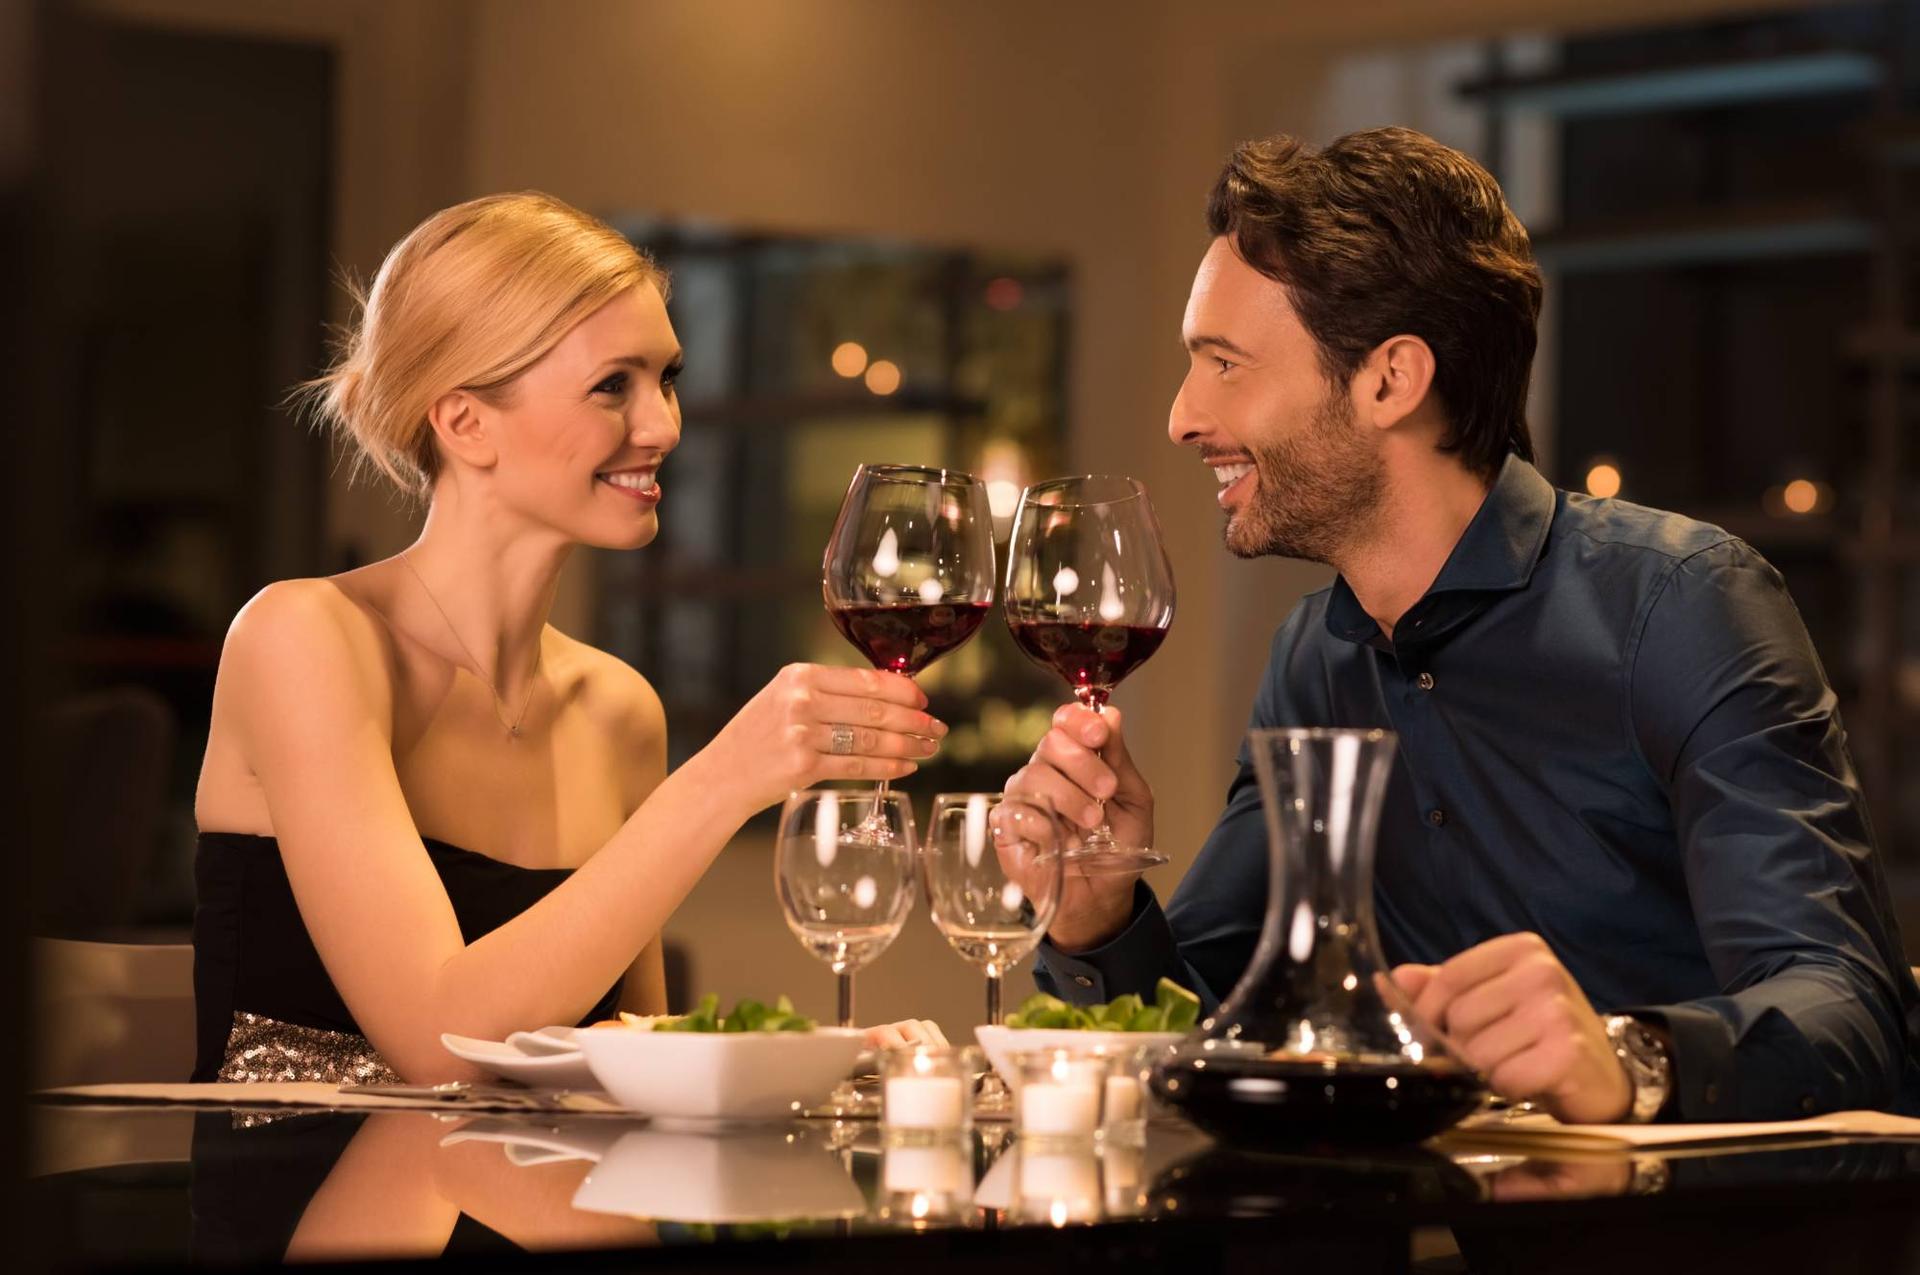 couple having a nice meal and wine at a local restaurant